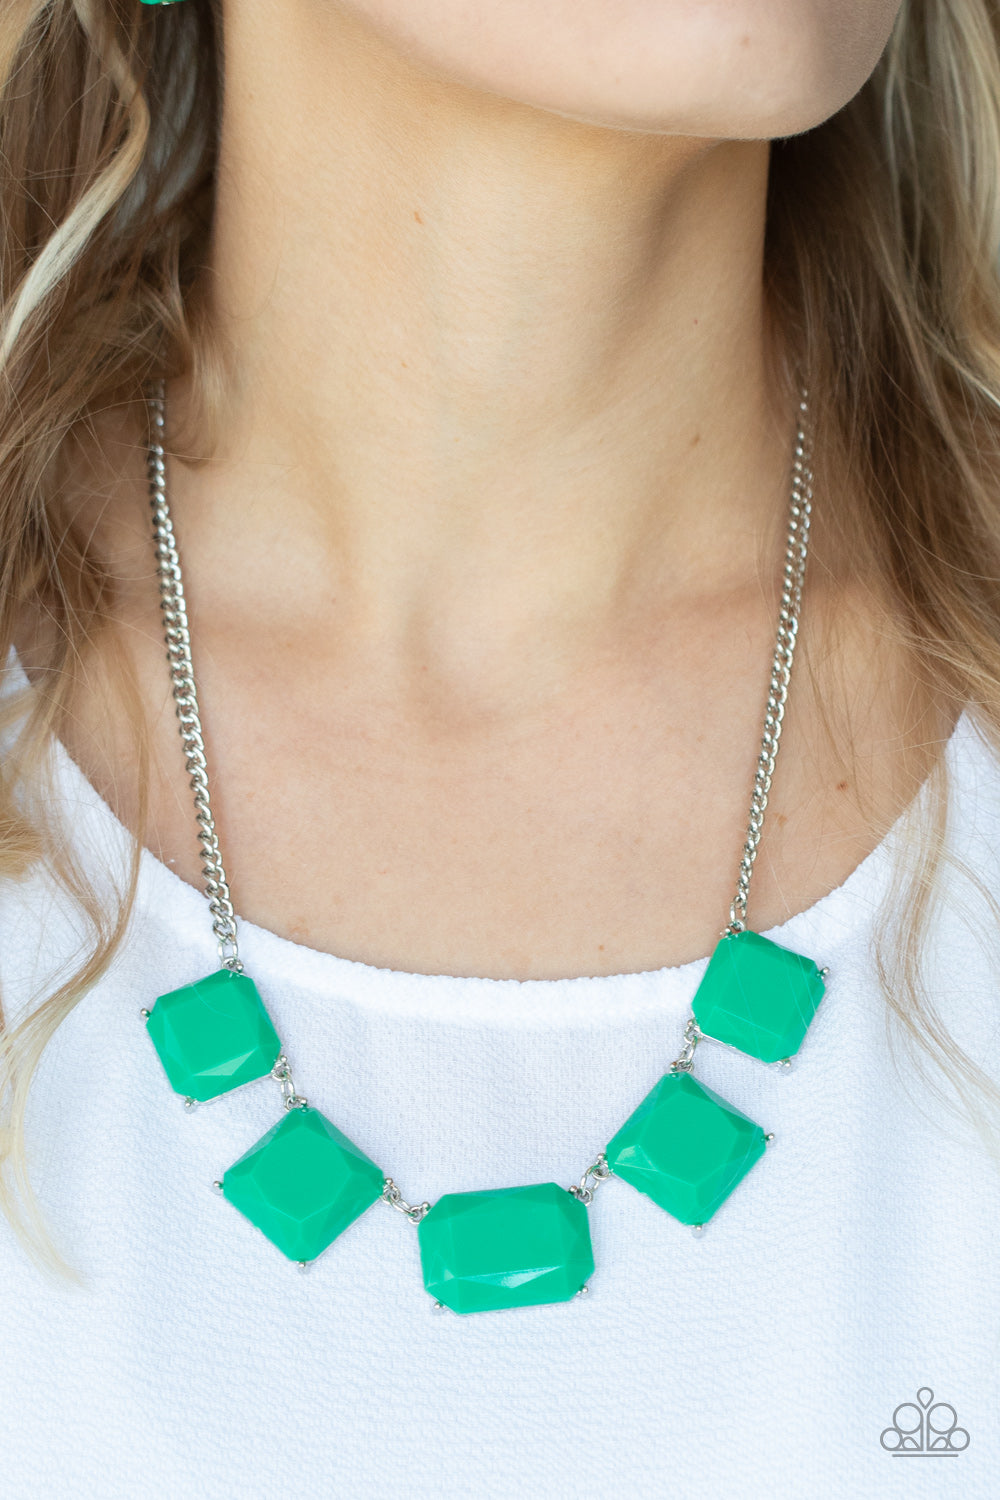 Paparazzi Accessories - Instant Mood Booster #N674 - Green Necklace